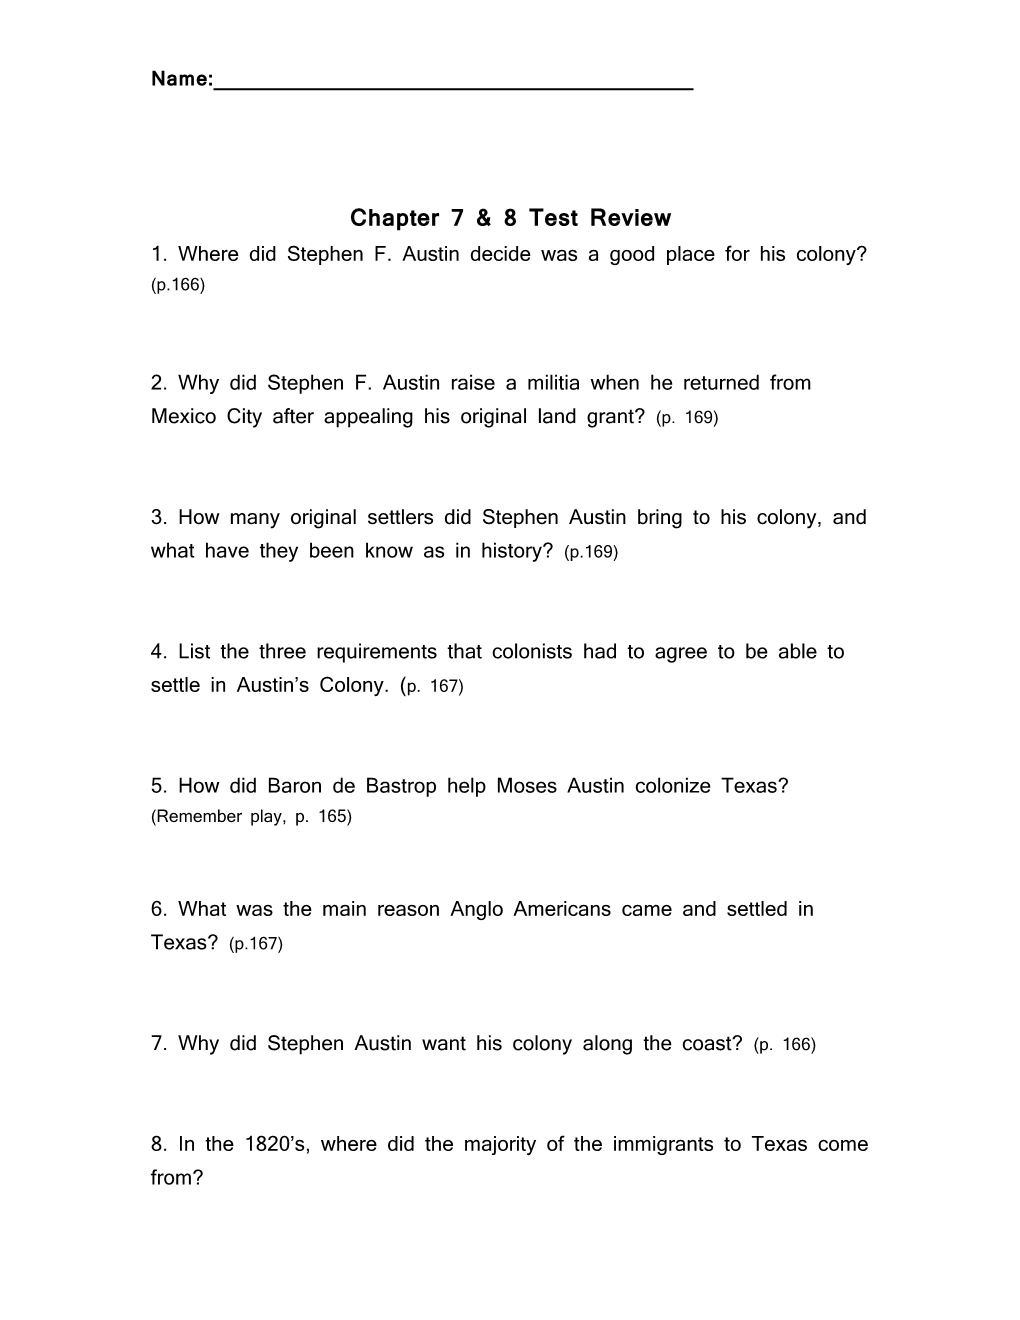 Chapter 7 & 8 Test Review